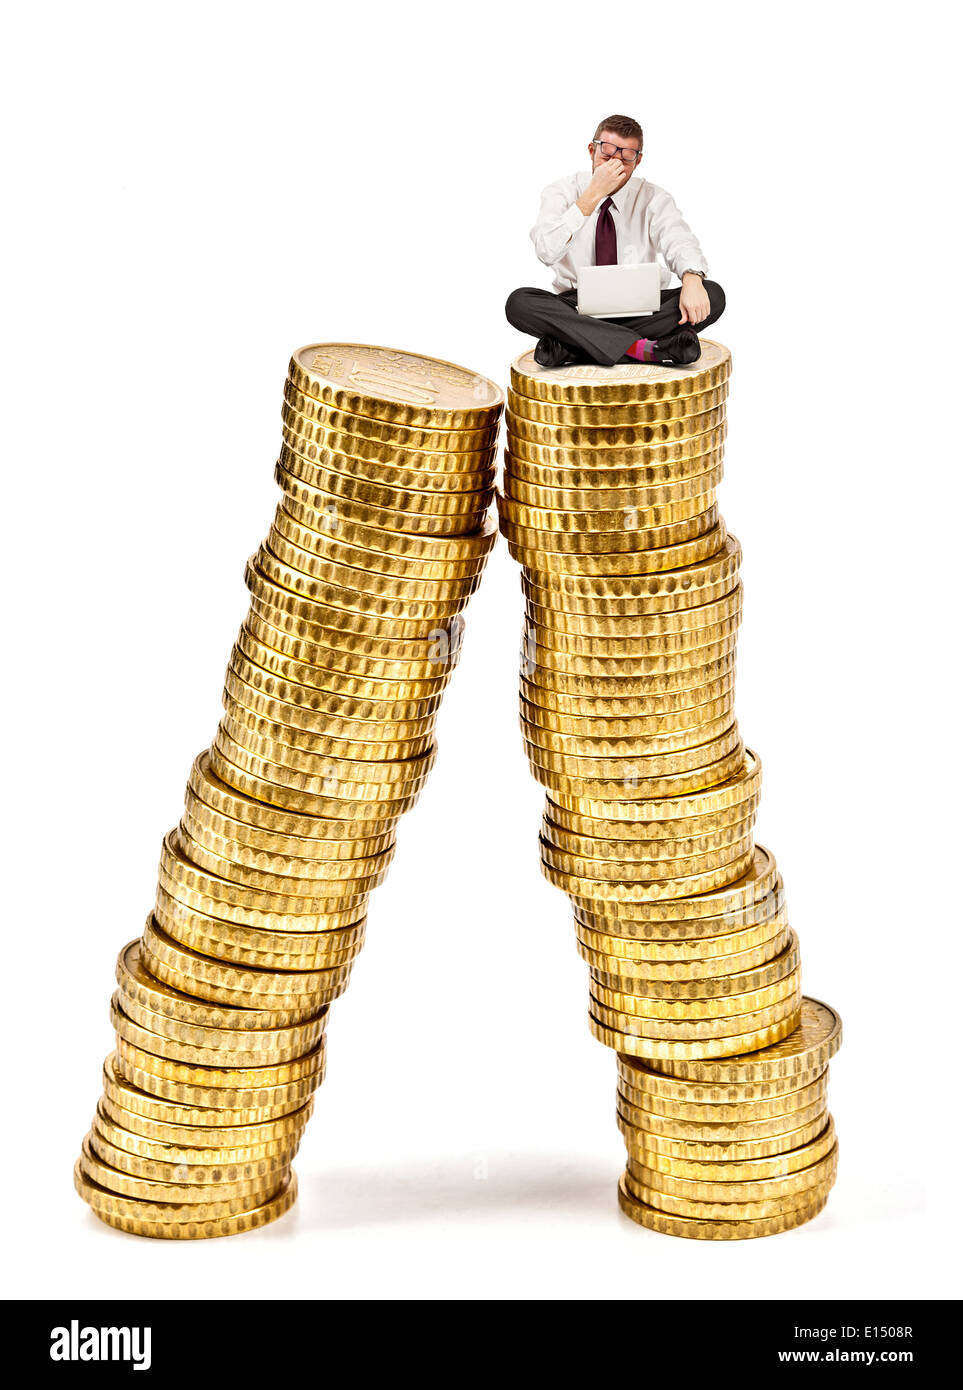 stressed man on pile of euro coin Stock Photo